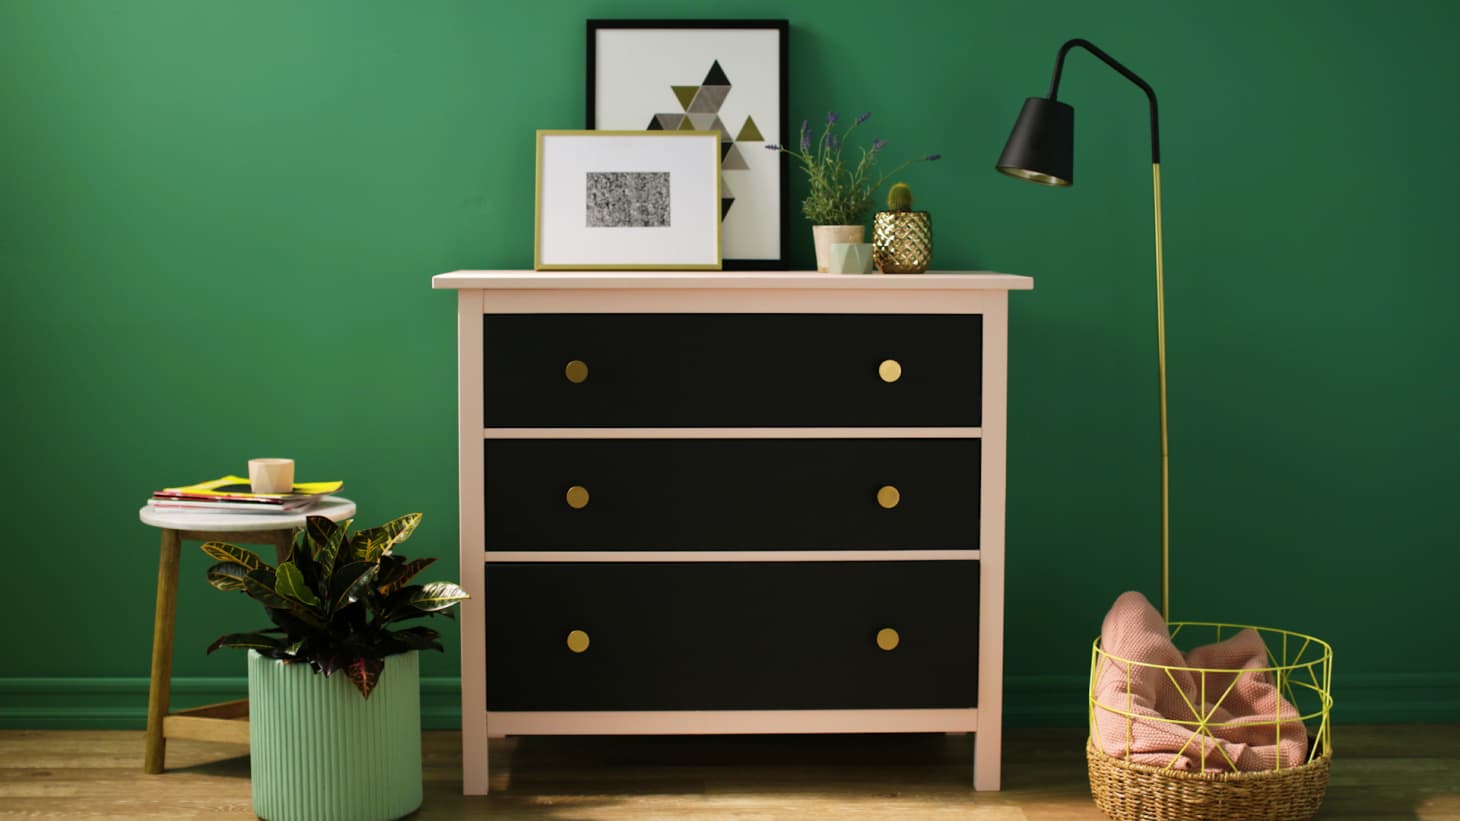 Introducing The Little Black Dresser Apartment Therapy